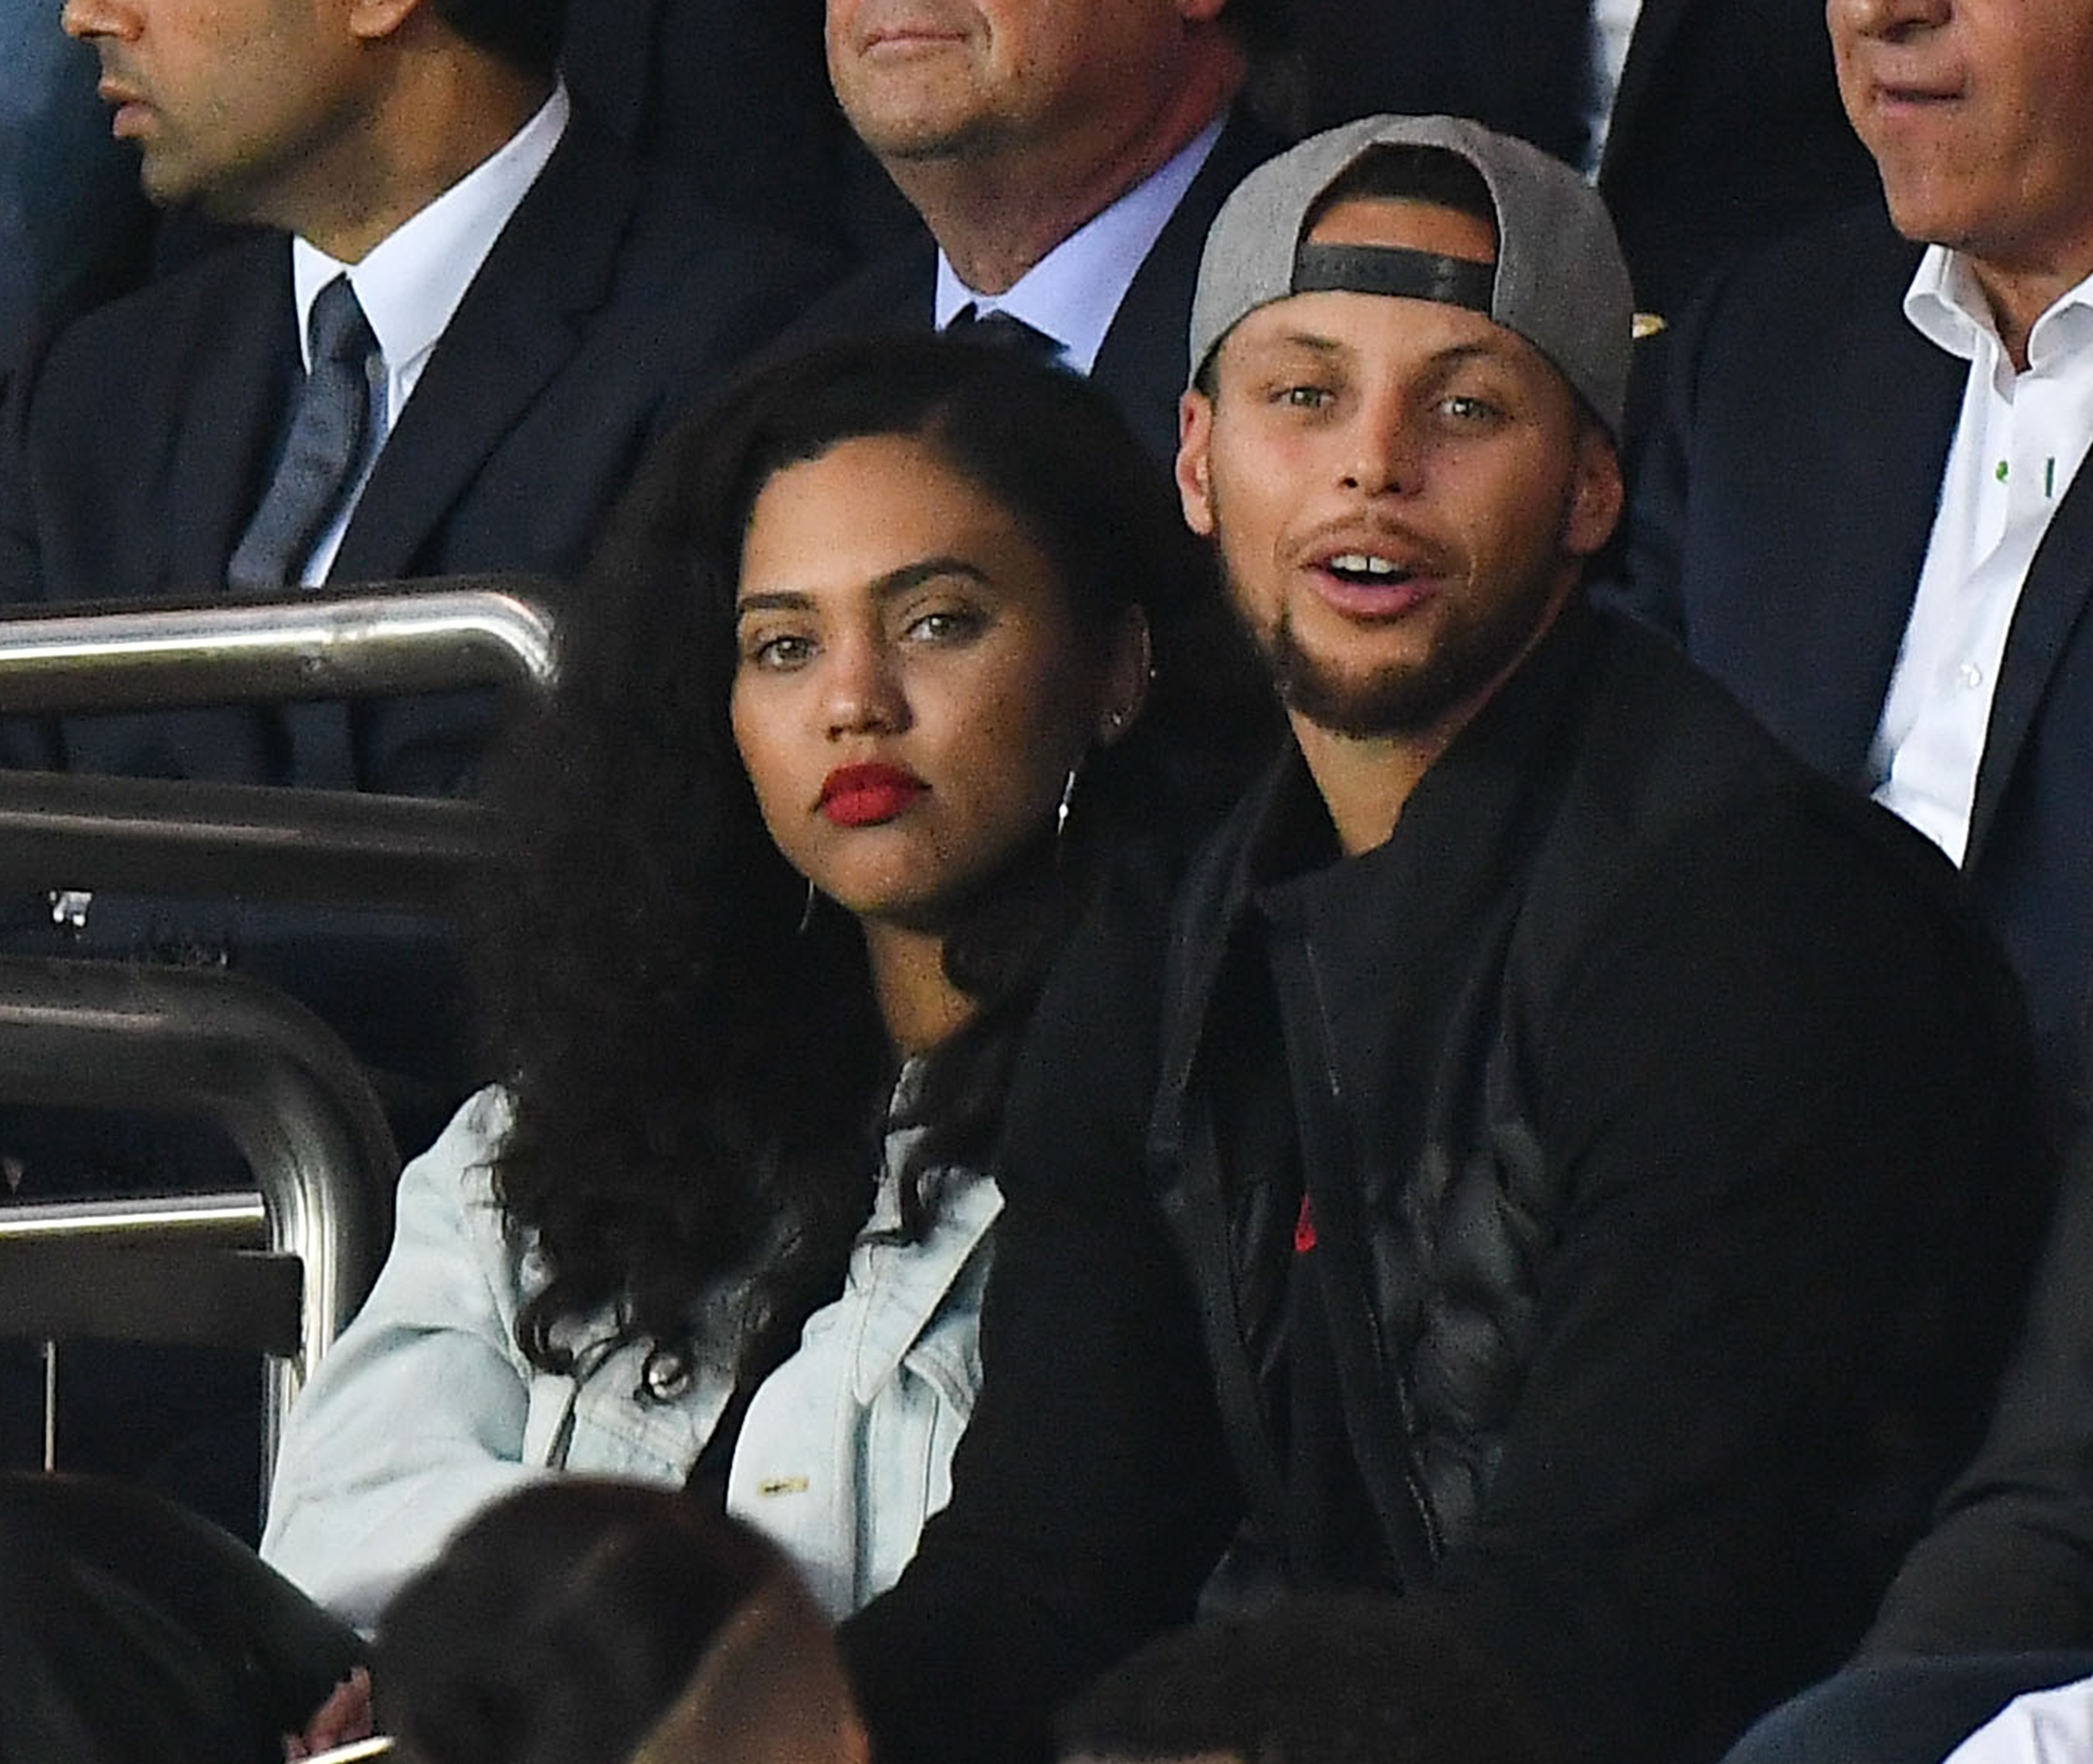 Ayesha Curry and Steph Curry